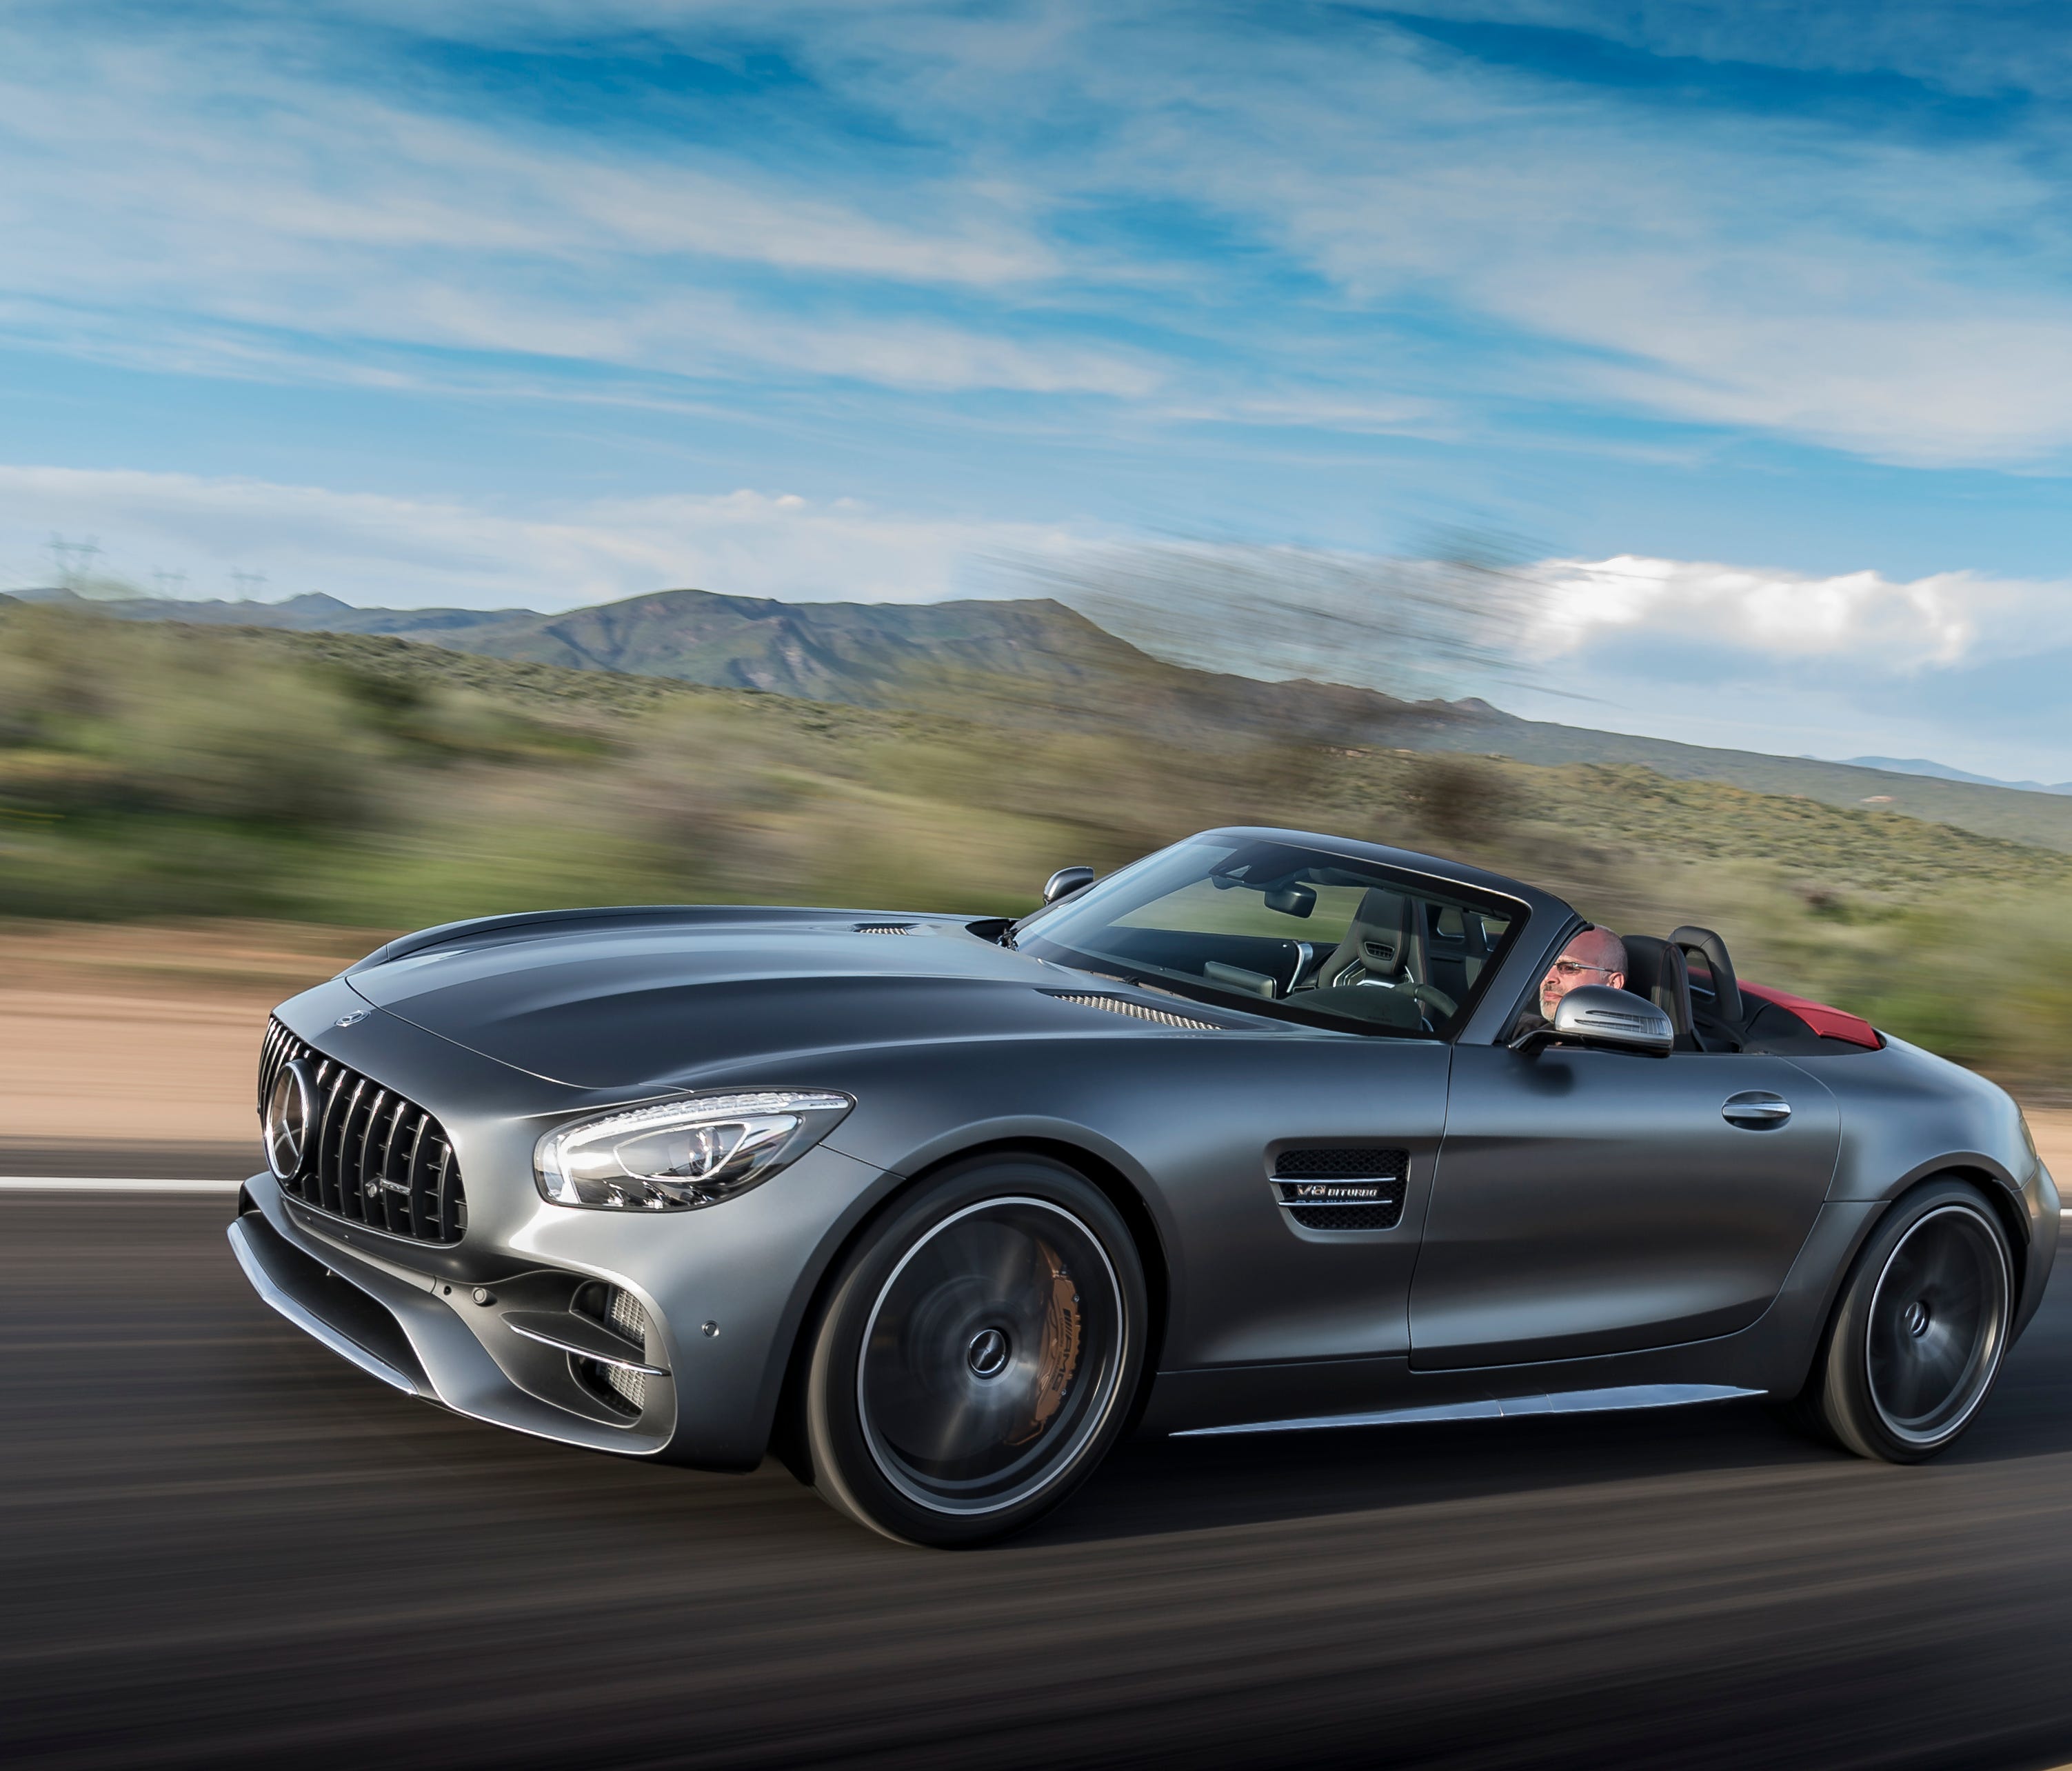 On the road, the AMG GT C exhibits the poise of a grand touring coupe with the power of an American muscle car.